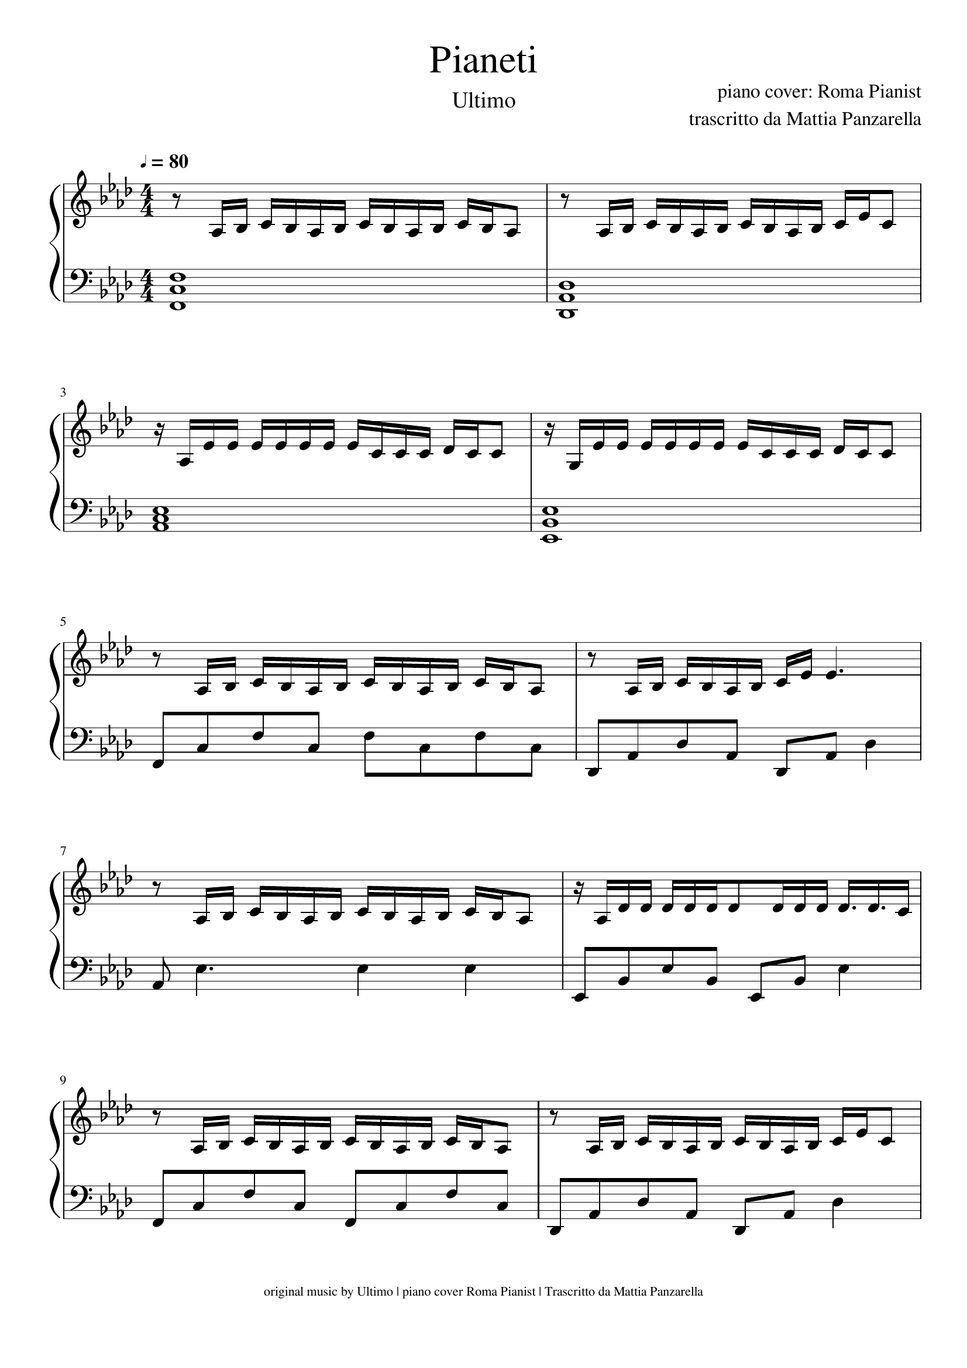 Ultimo - Pianeti Sheets by Roma Pianist